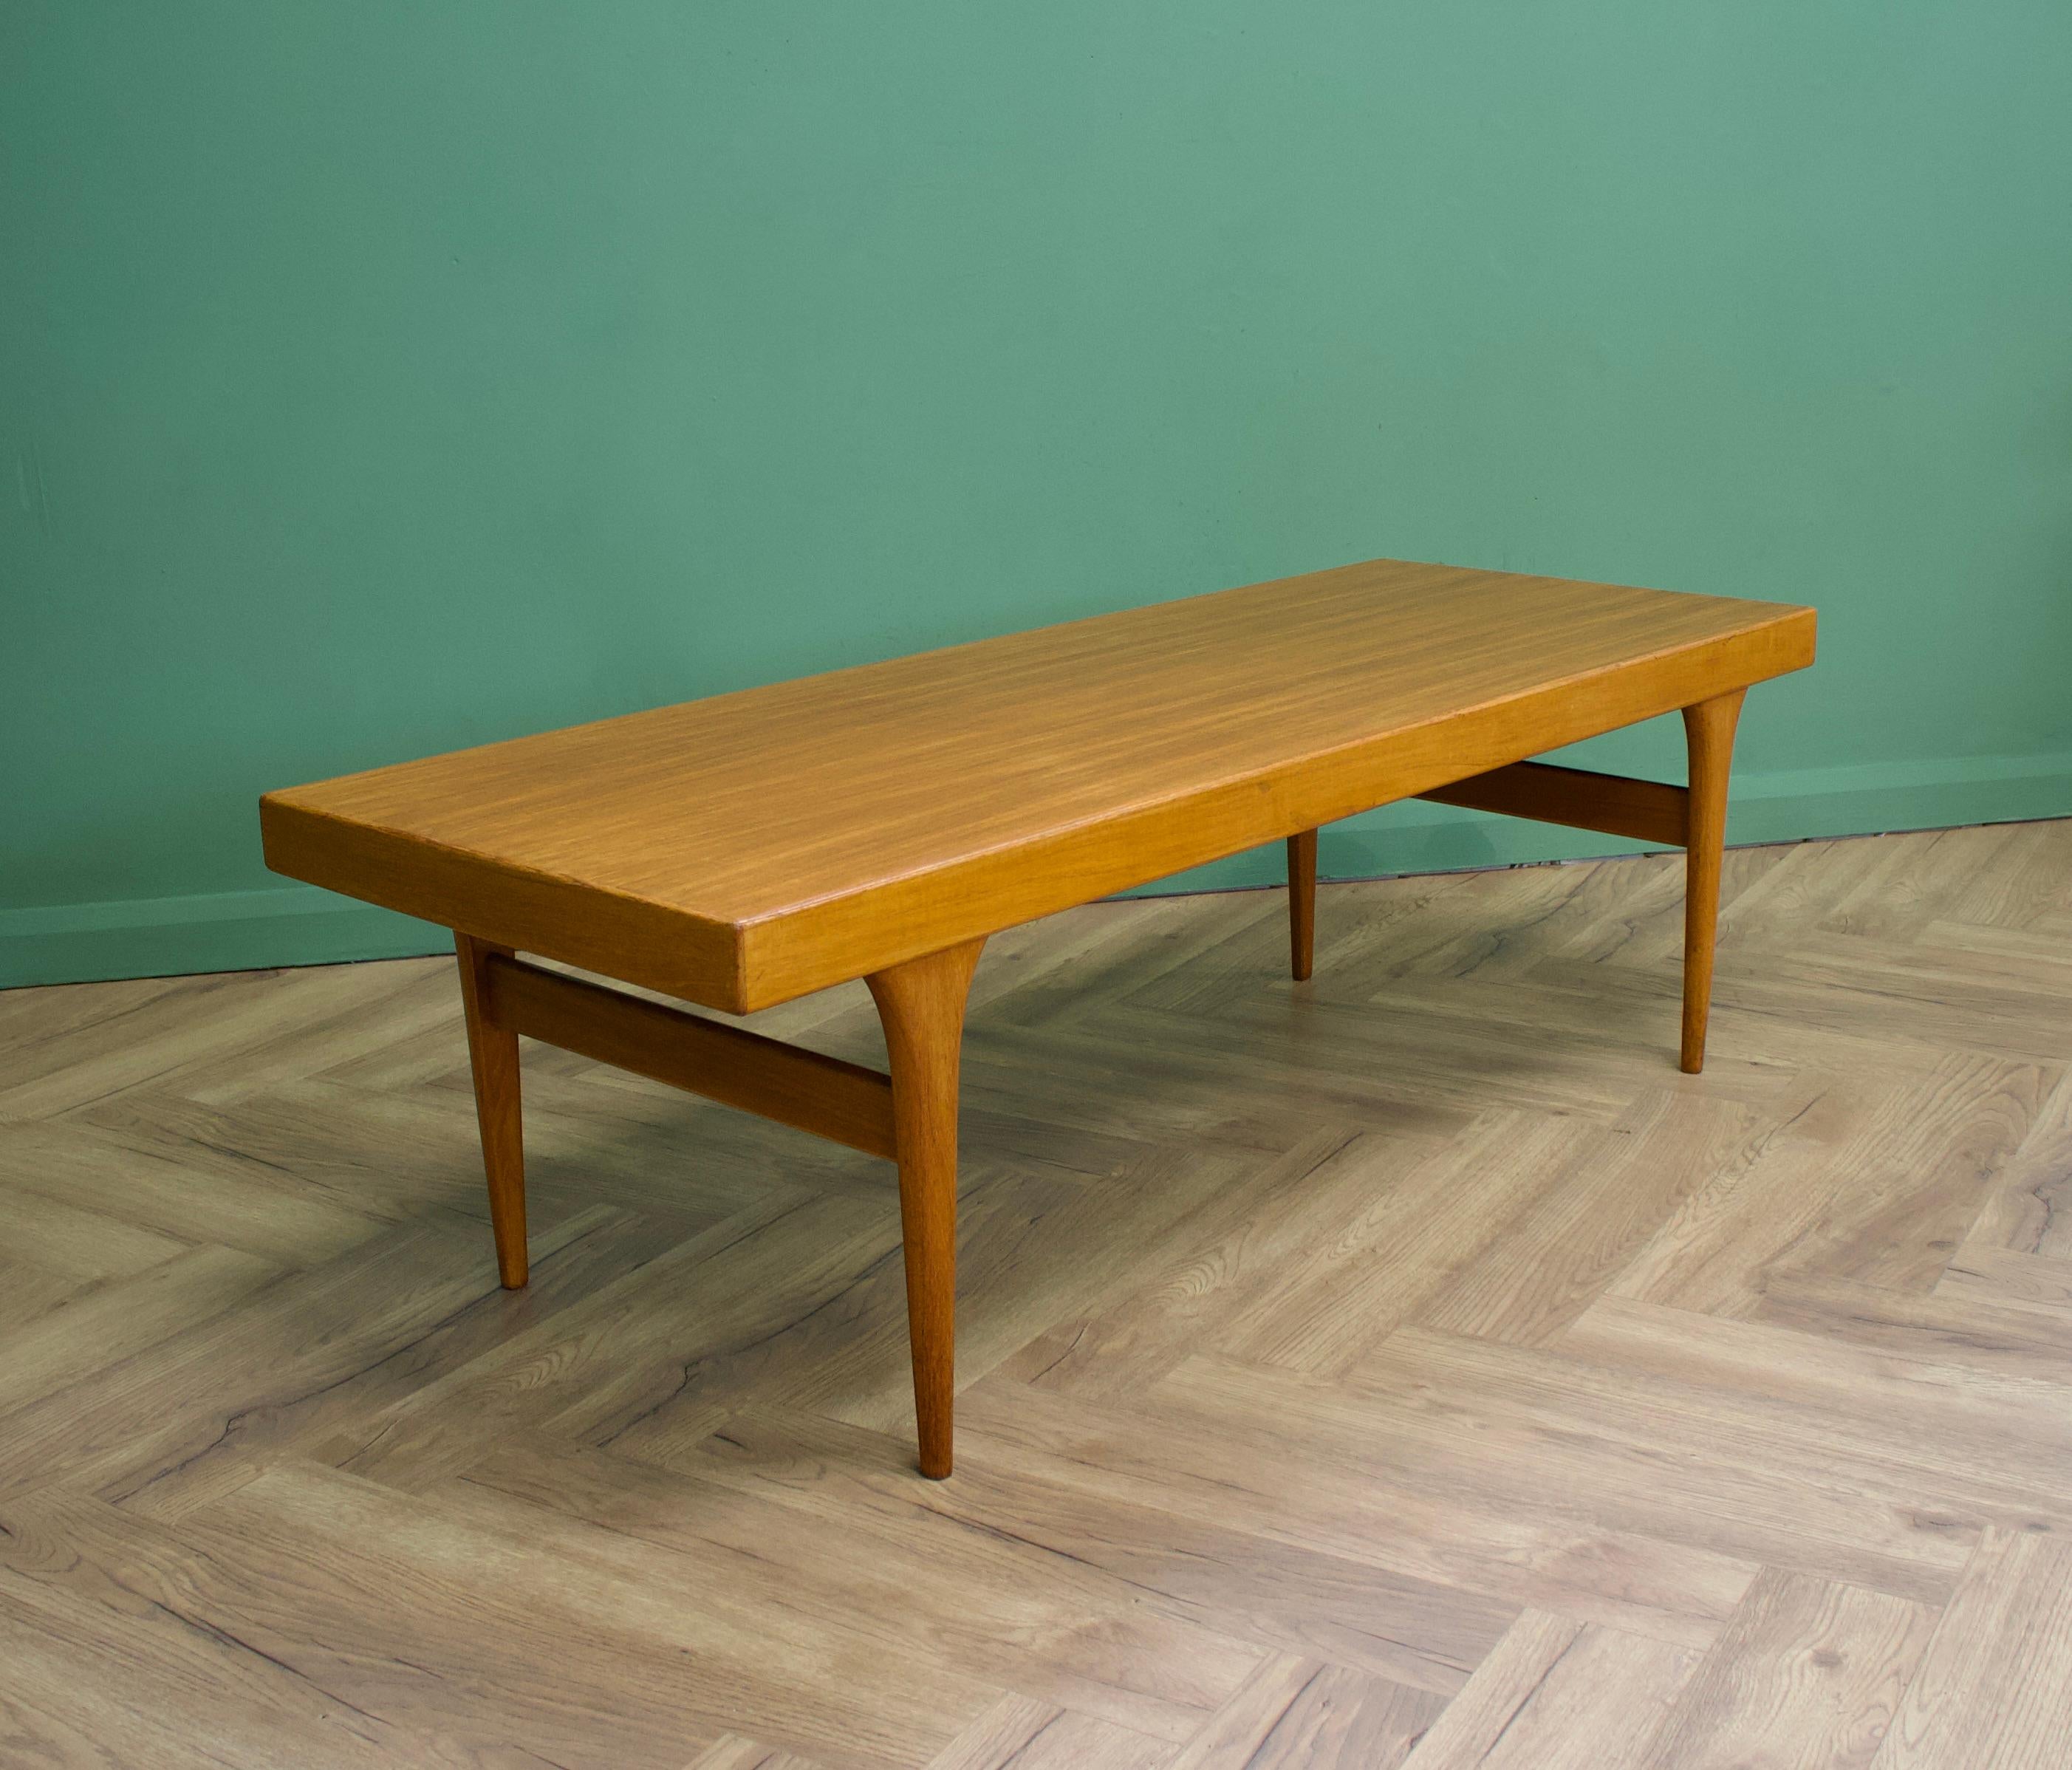 British Large Danish Teak Coffee Table from Silkeborg, 1960s For Sale